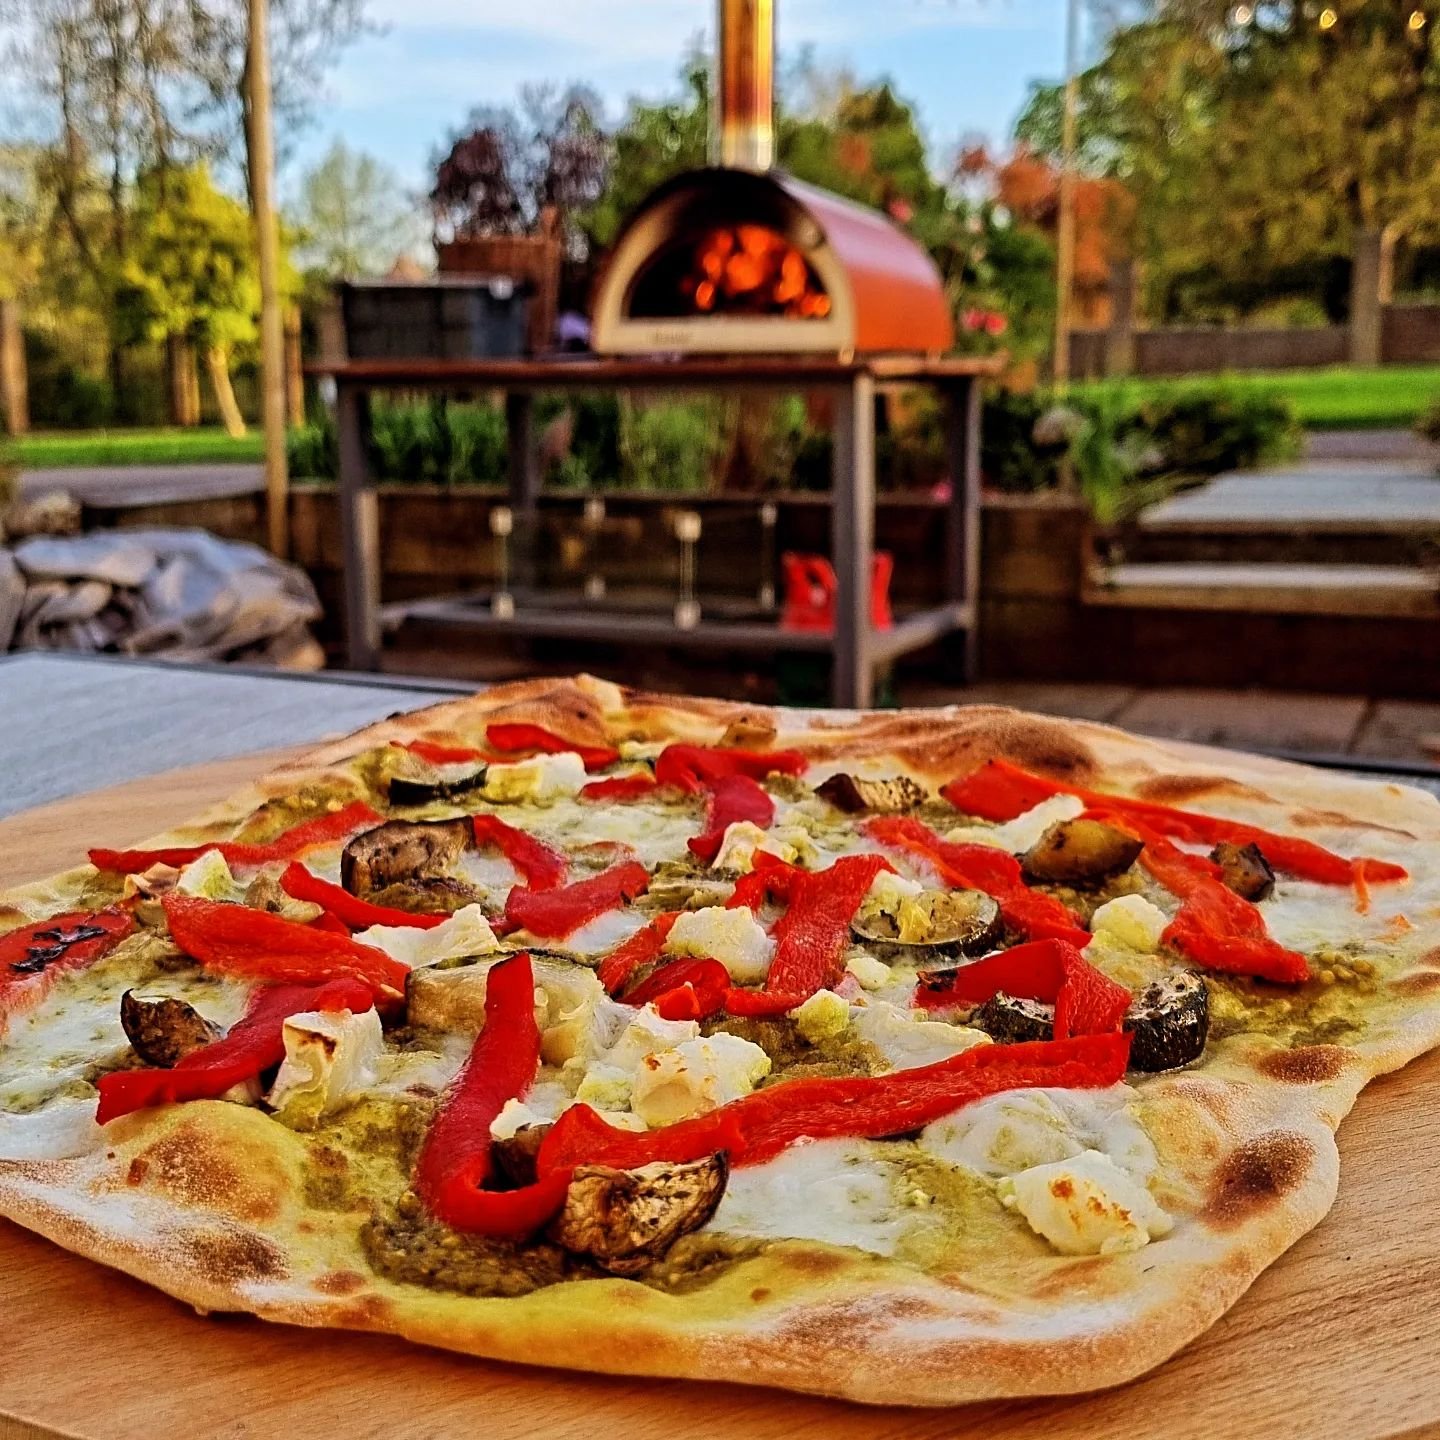 And pizza!

#woodfired #pizza